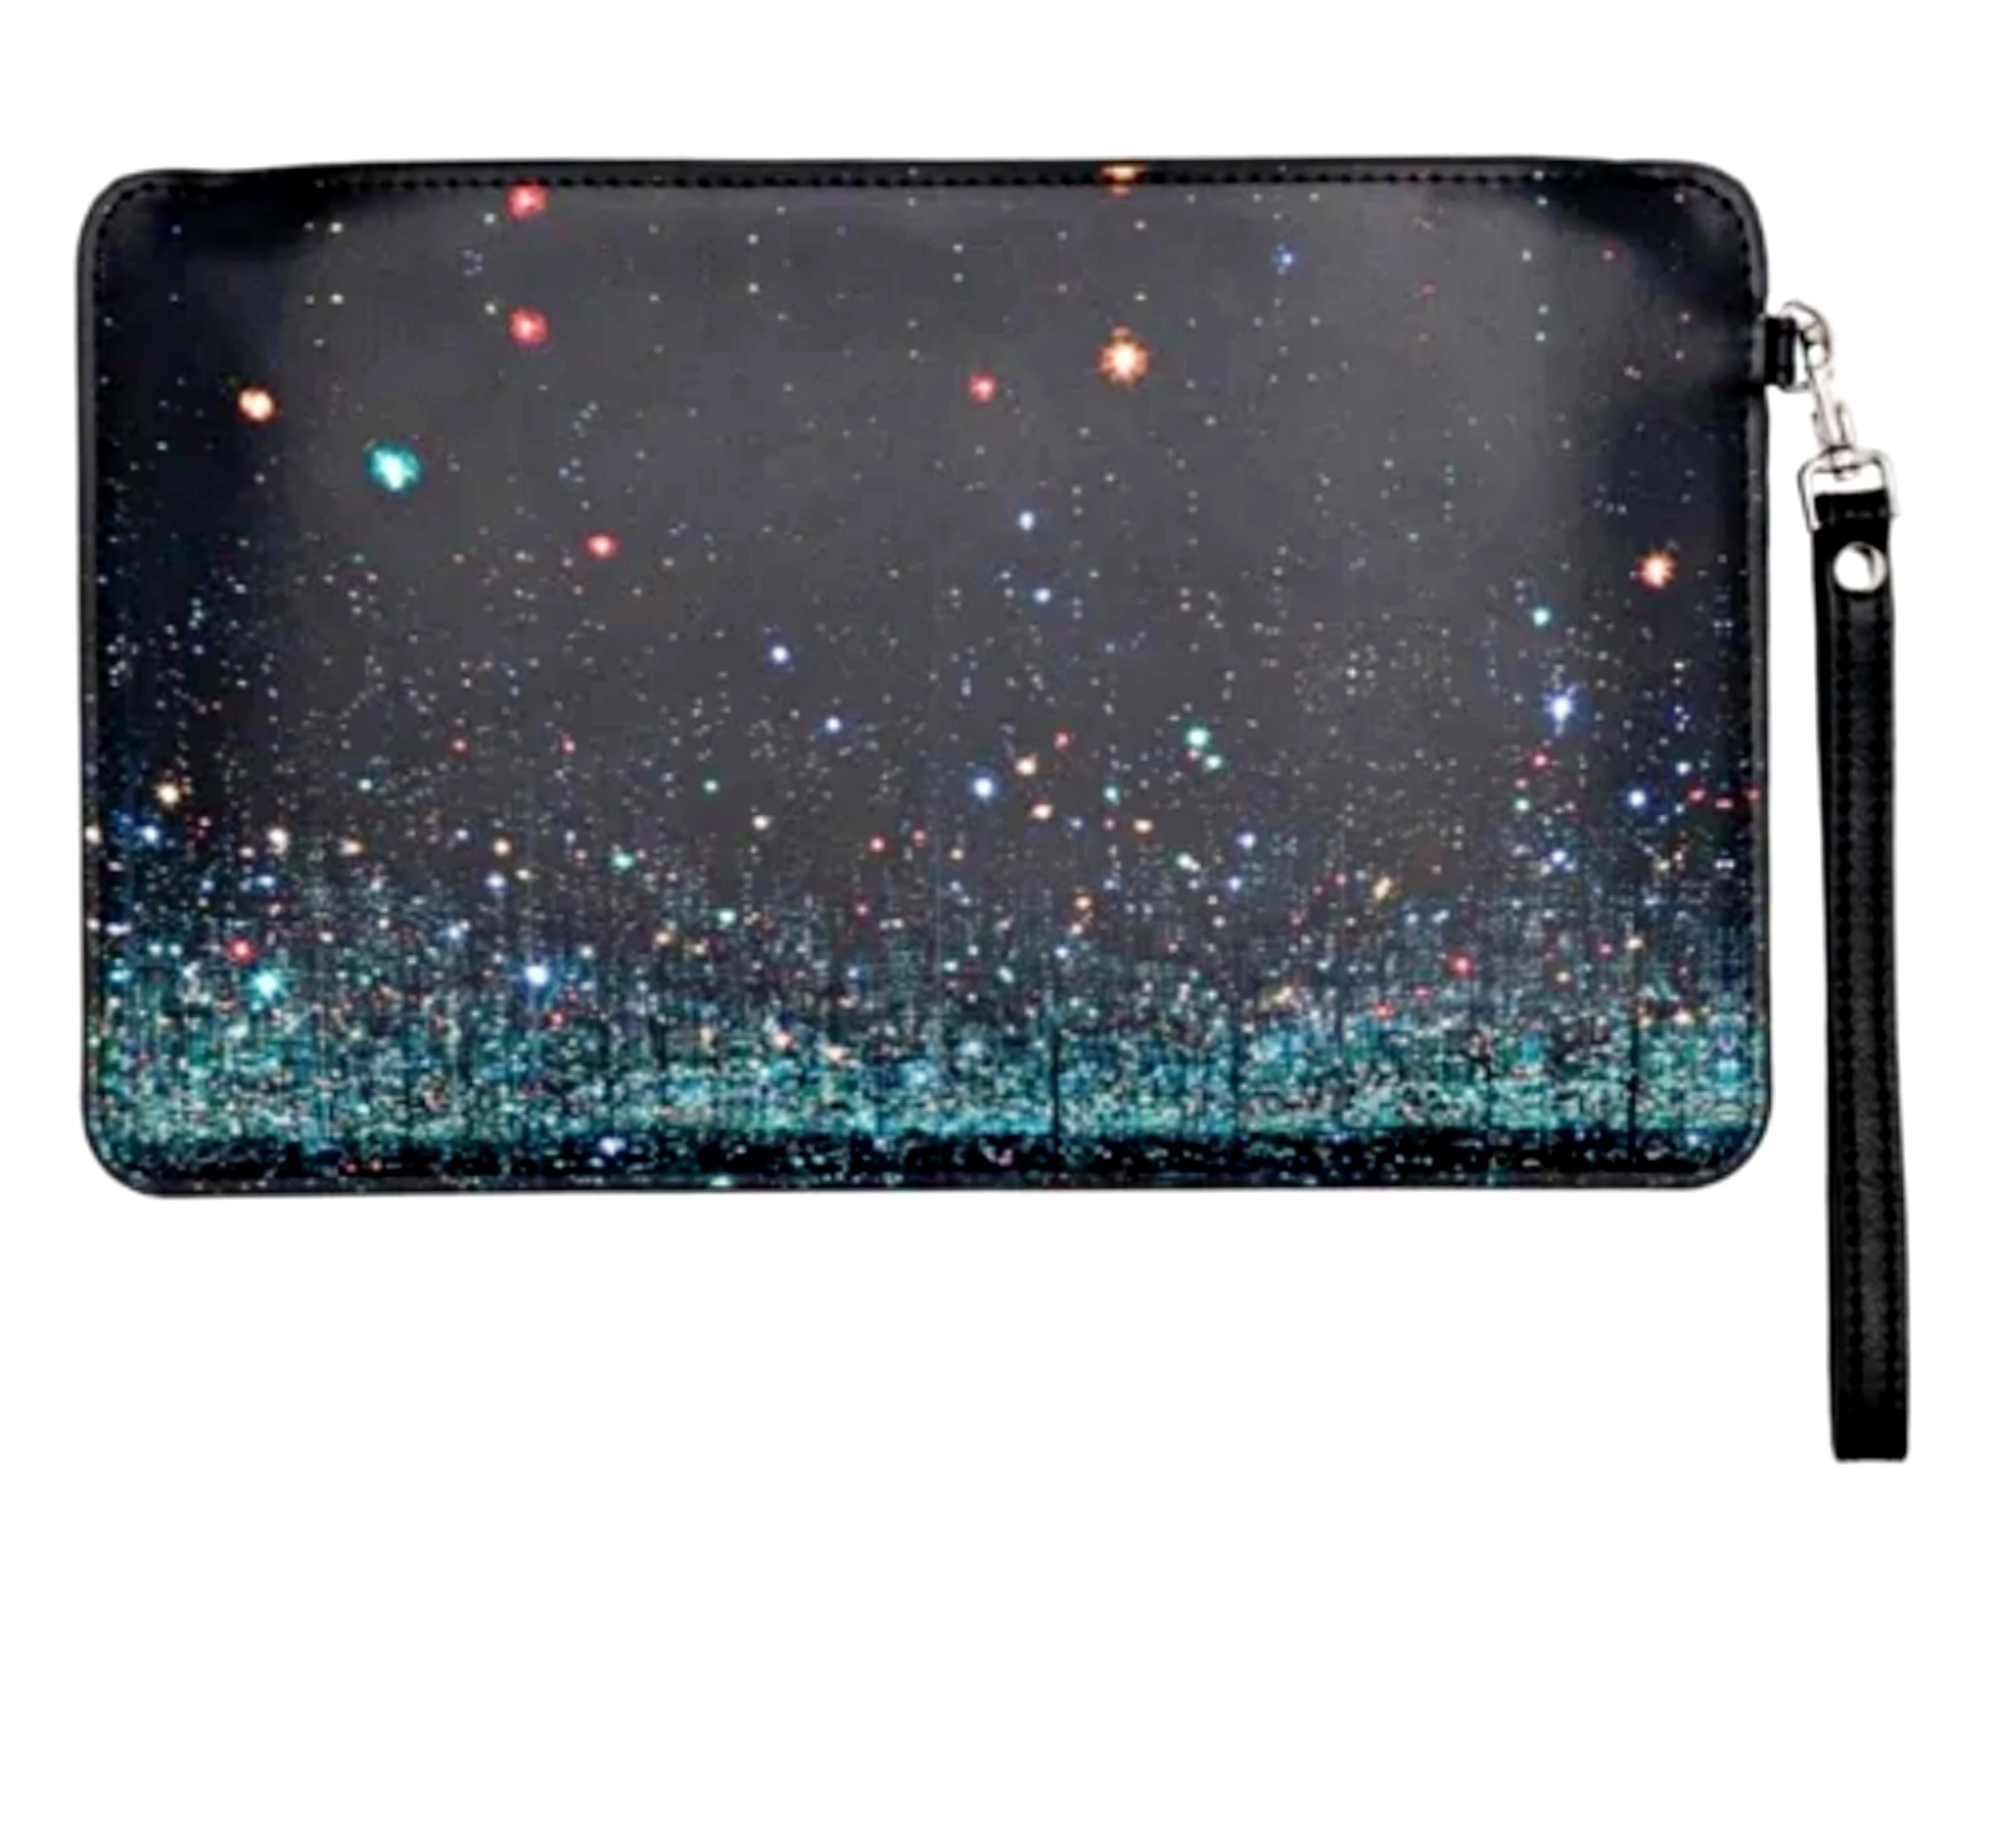 Limited Edition leather clutch (bag) depicting the famed Infinity Mirrored Room - Art by Yayoi Kusama